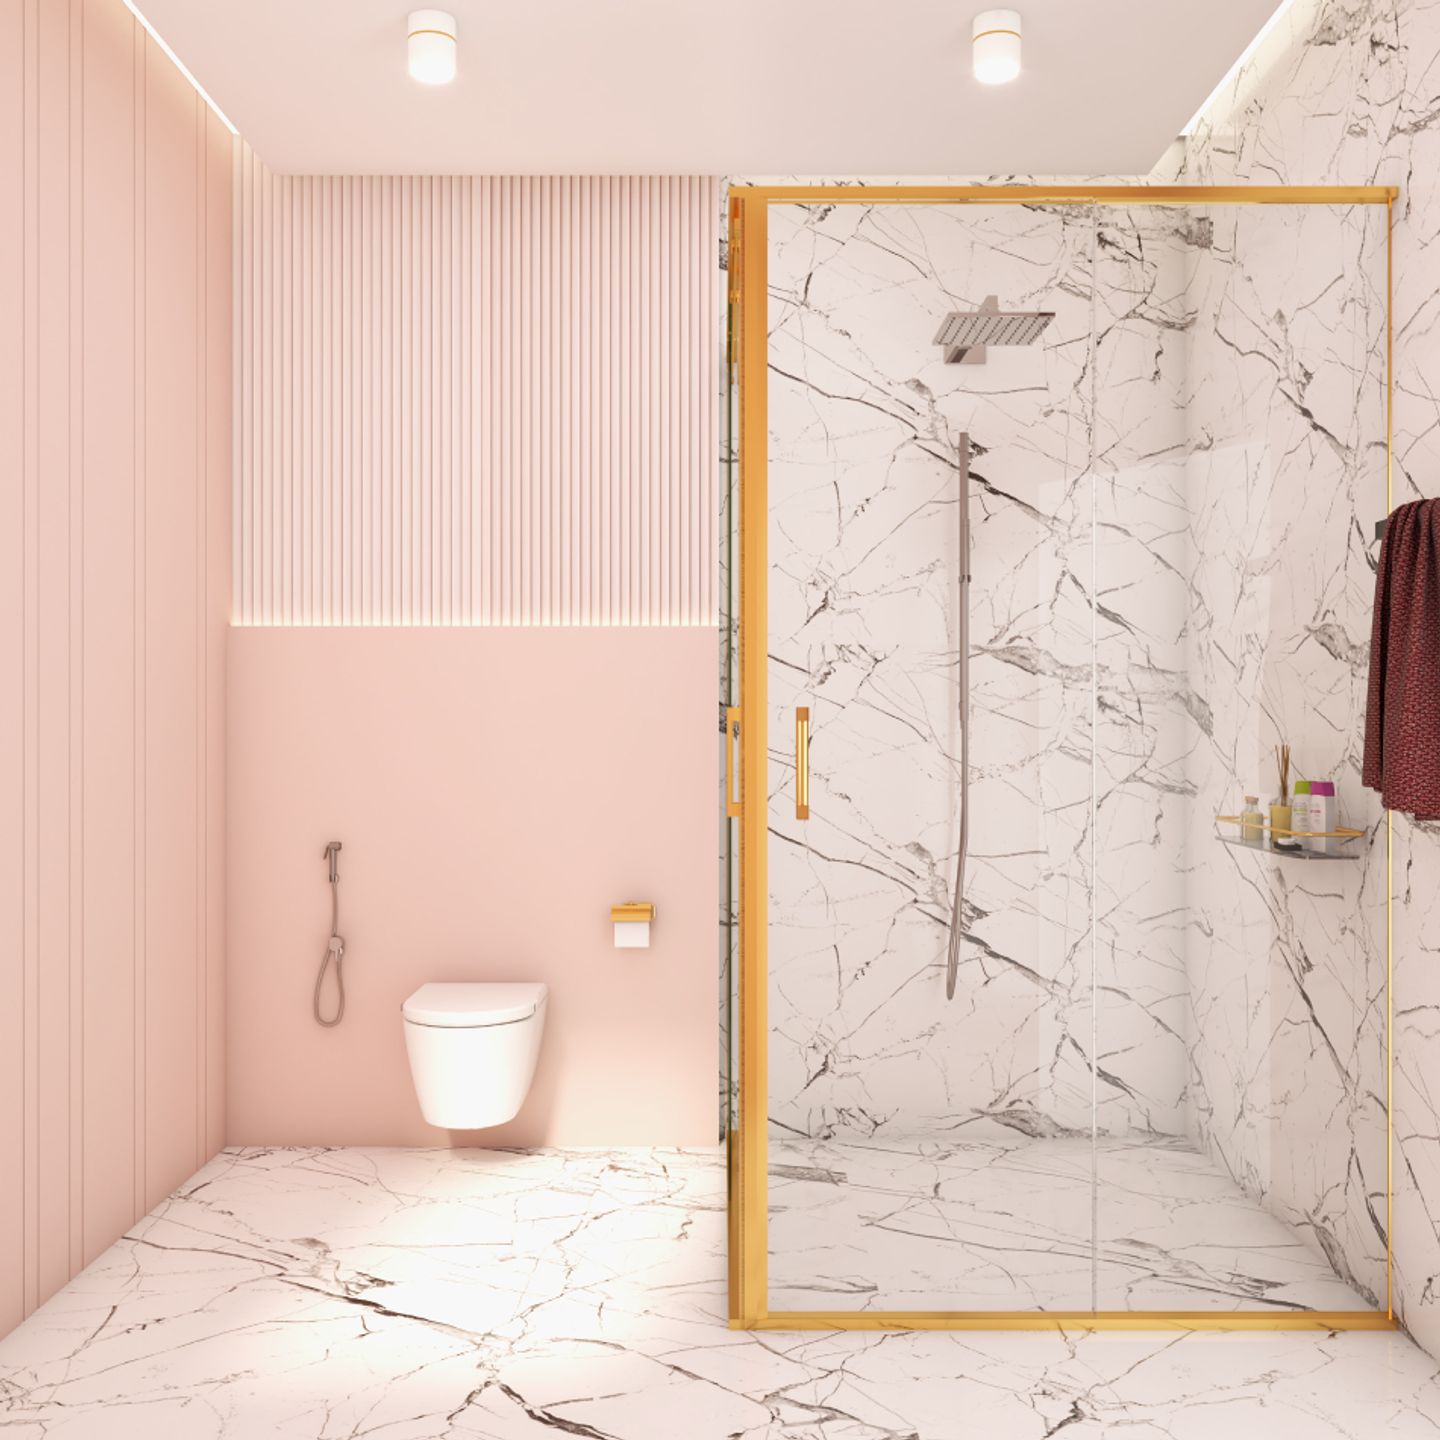 Pink And White Bathroom Tiles - Livspace